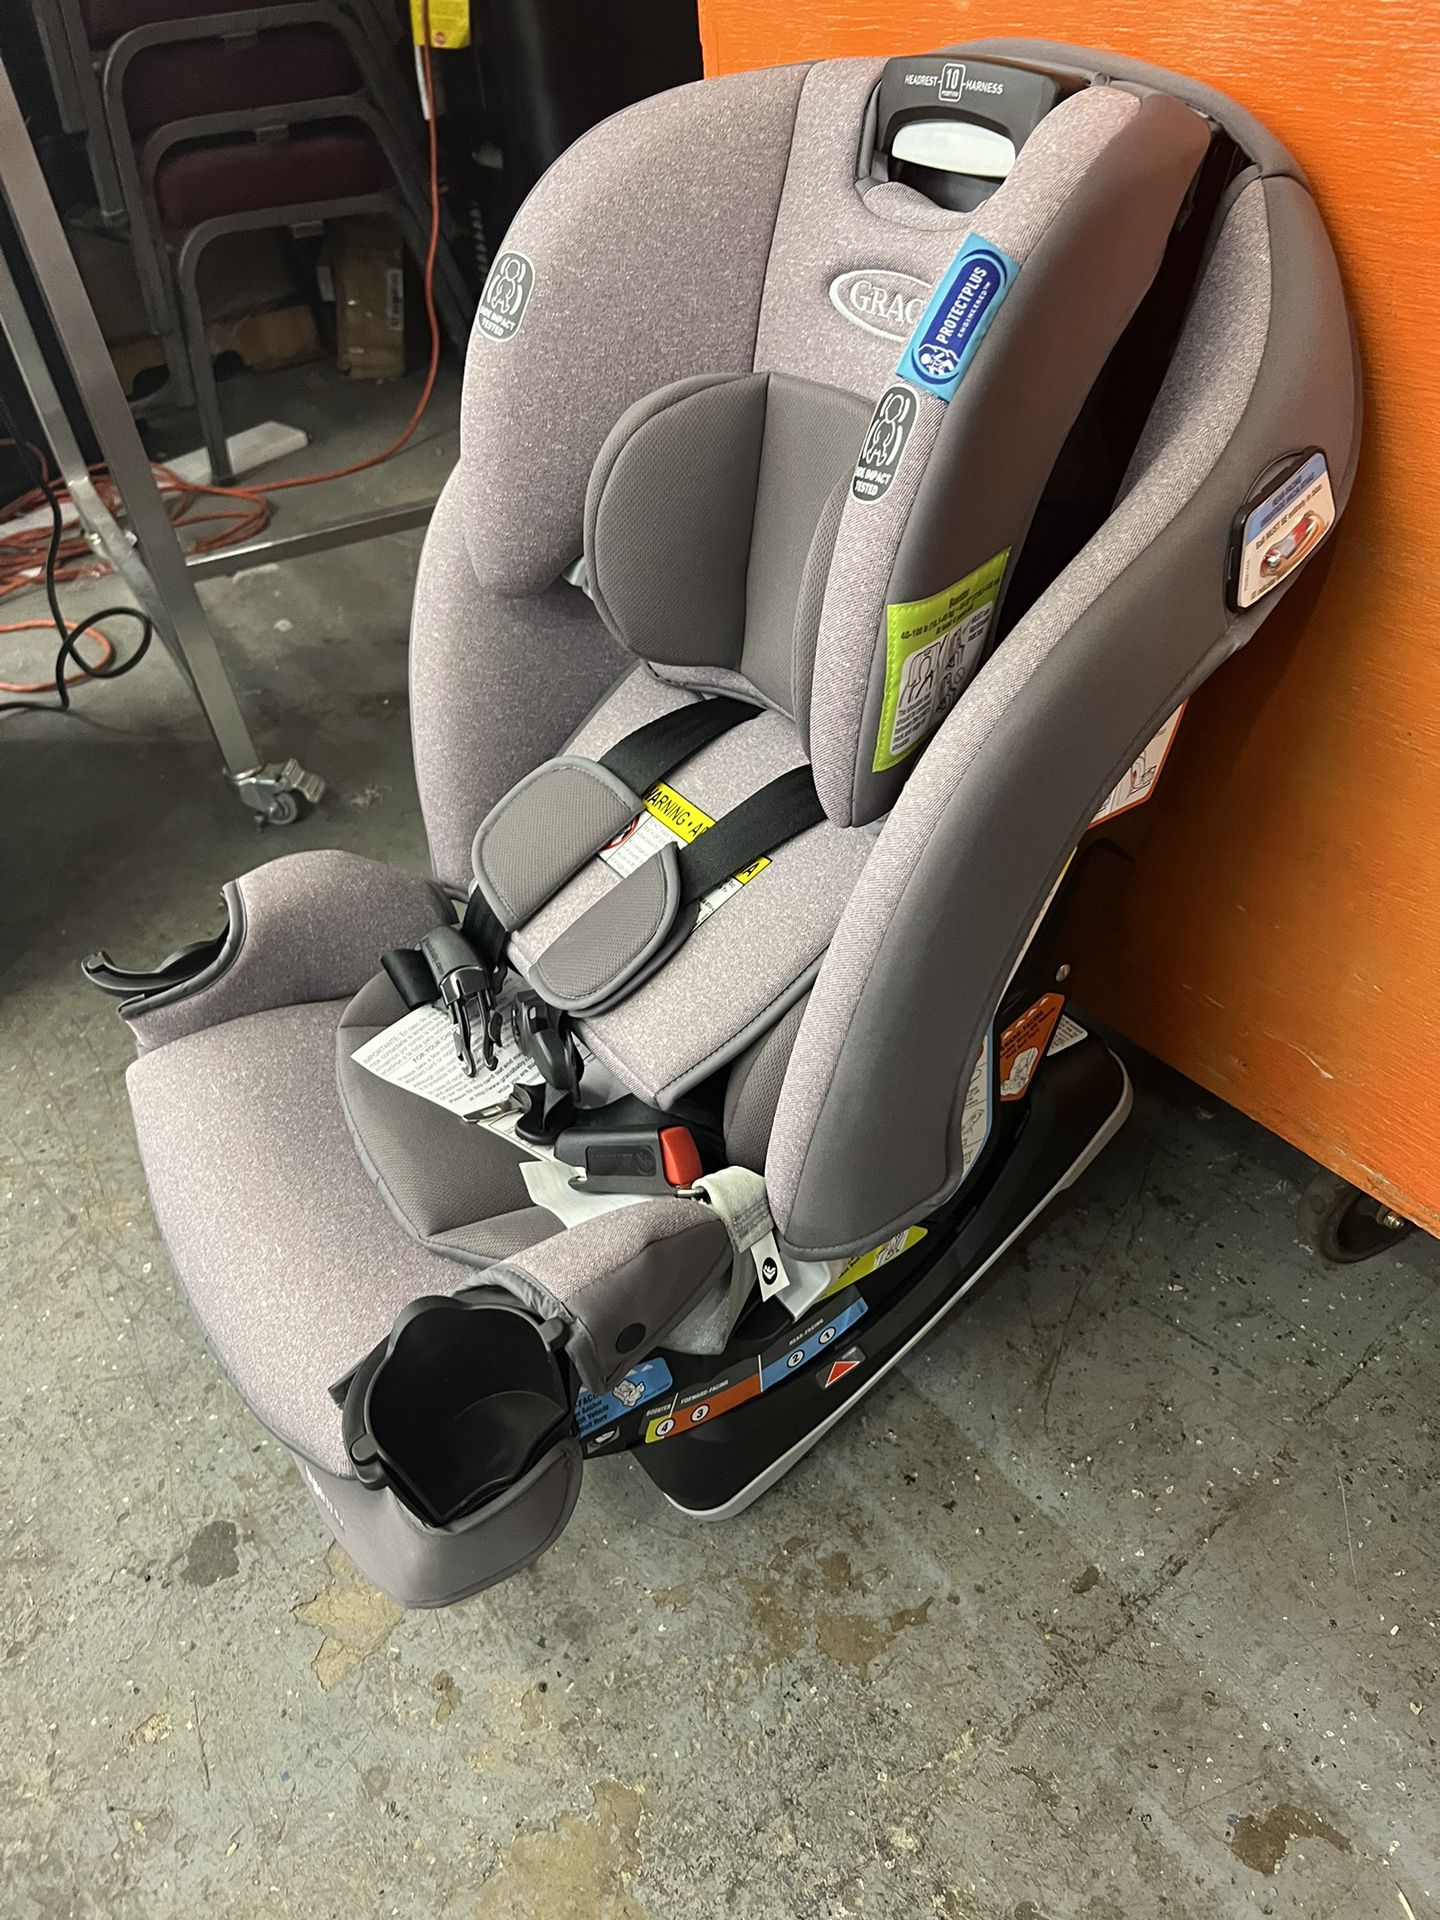 Graco Slim fit 3 in 1 Car seat for Sale in Jacksonville, FL - OfferUp